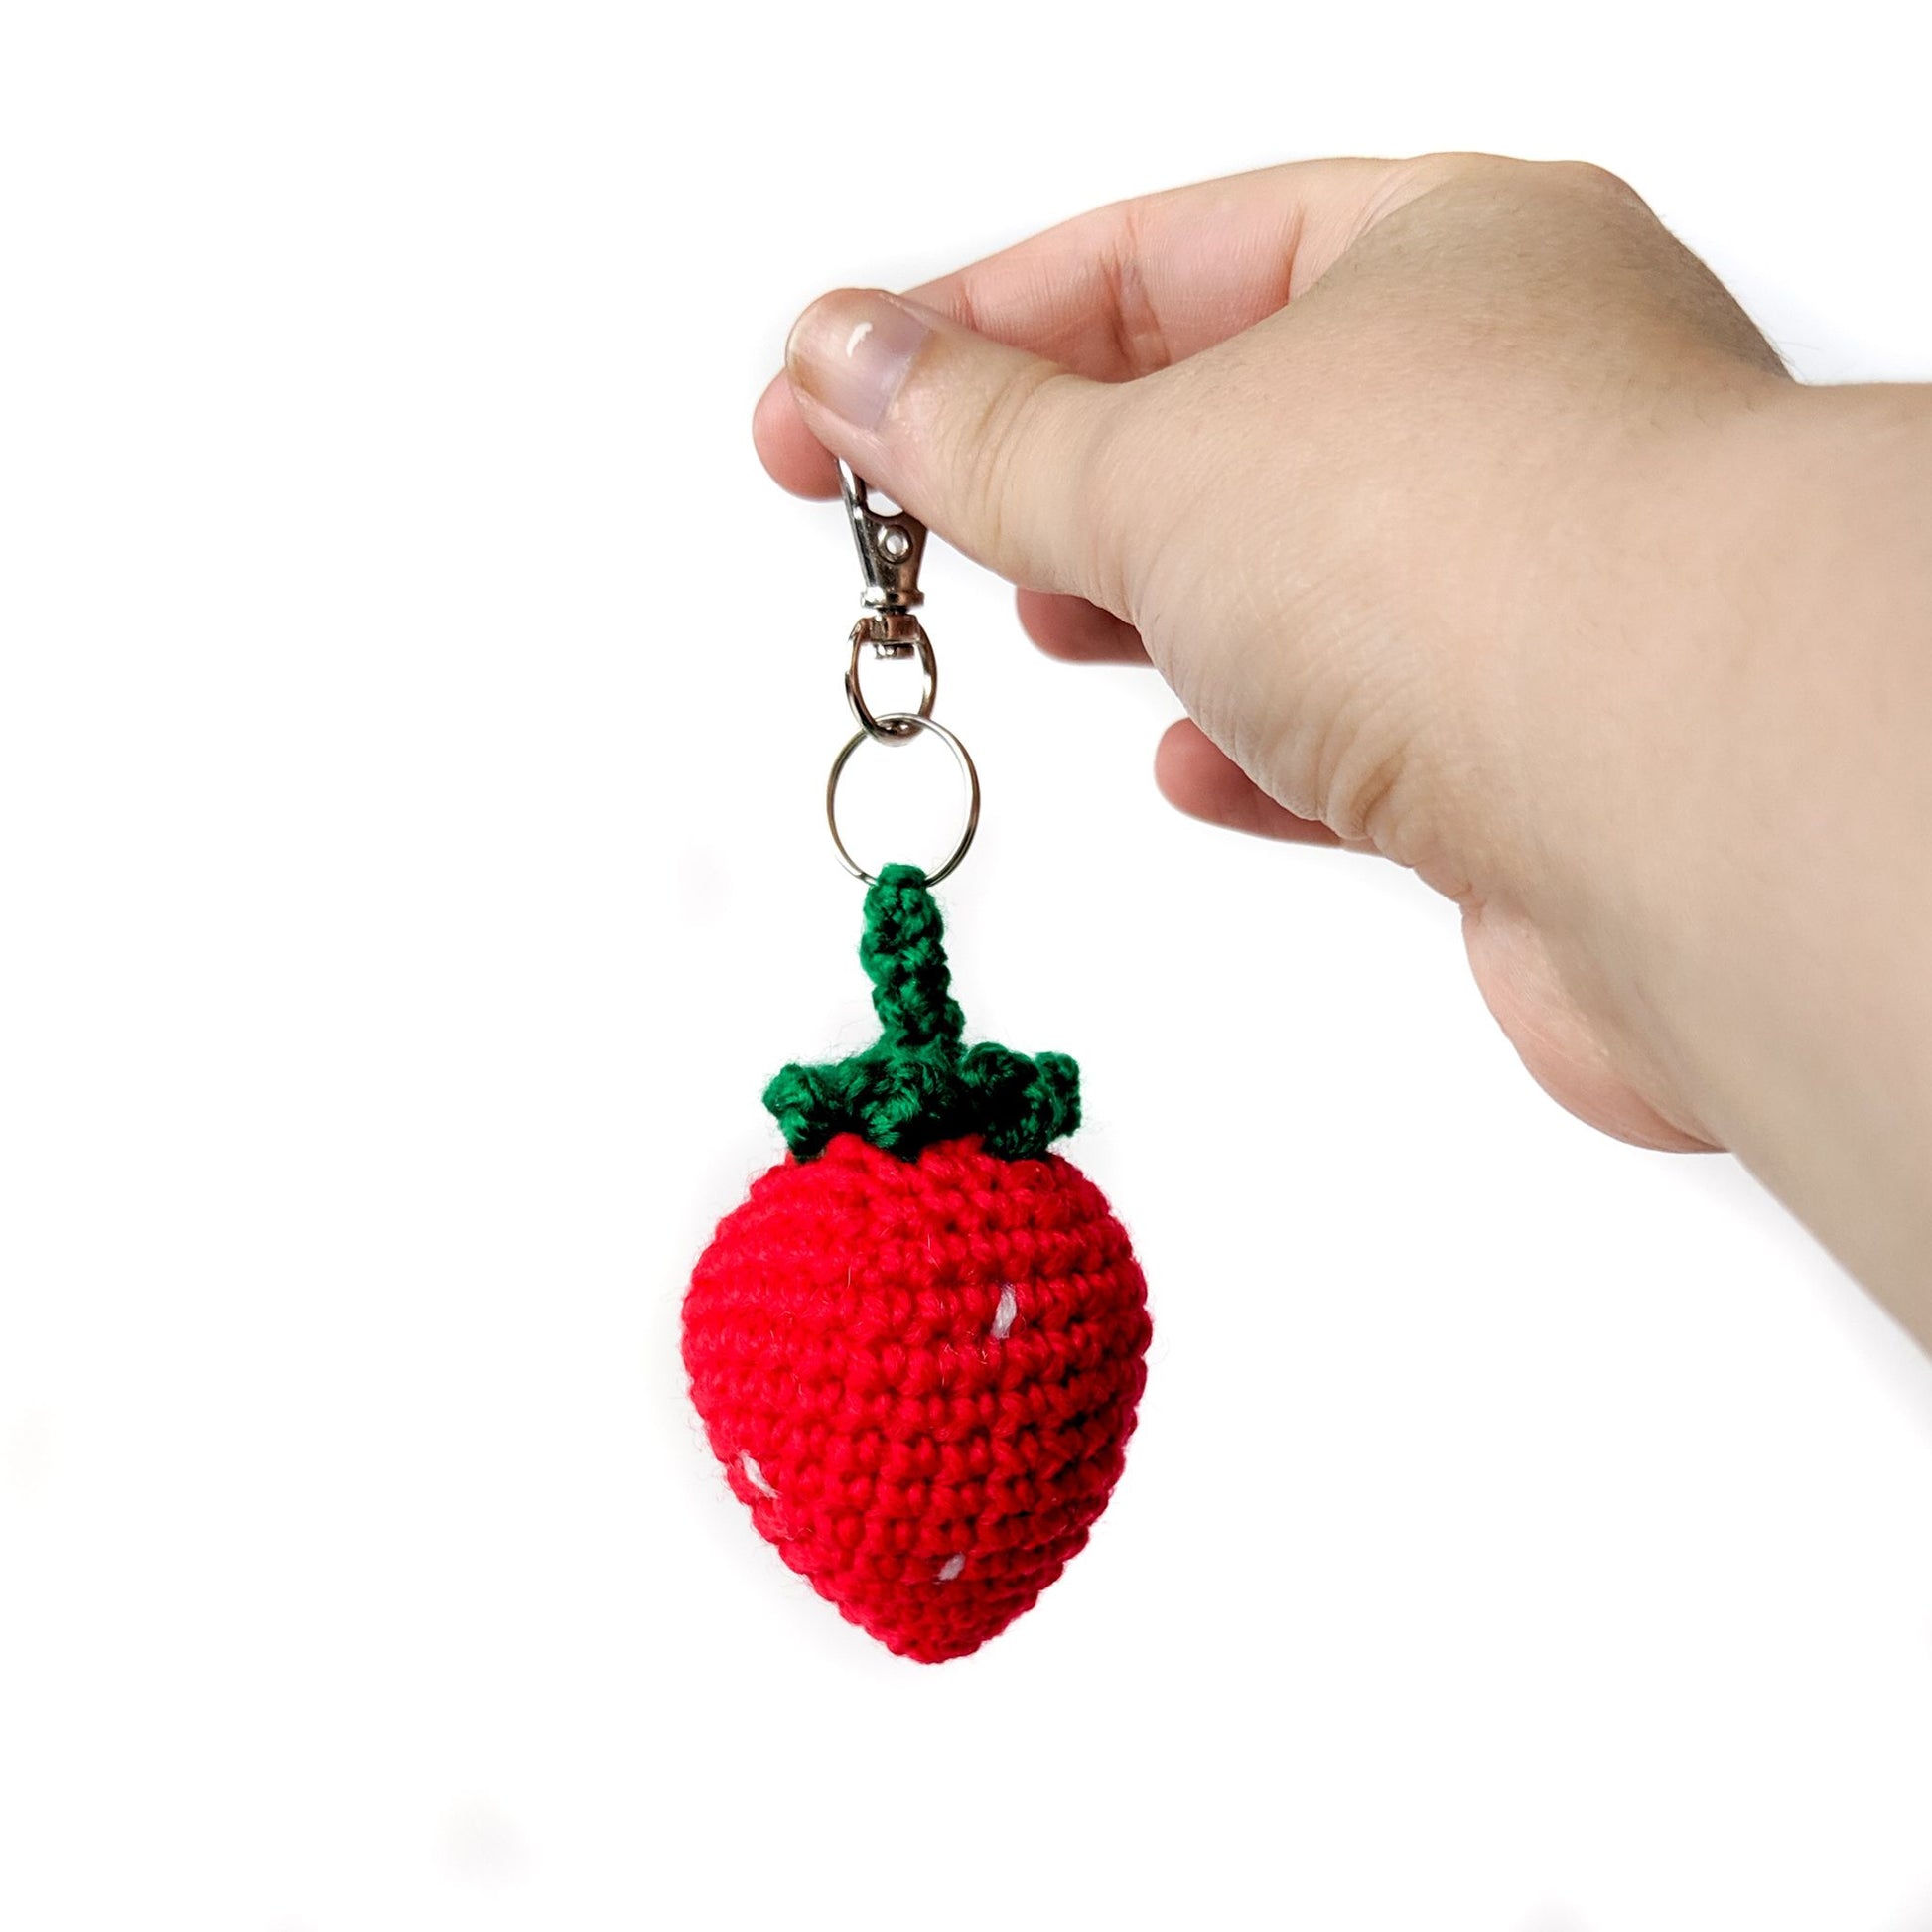 A Keychain Strawberry Amigurumi made with red and green acrylic yarns